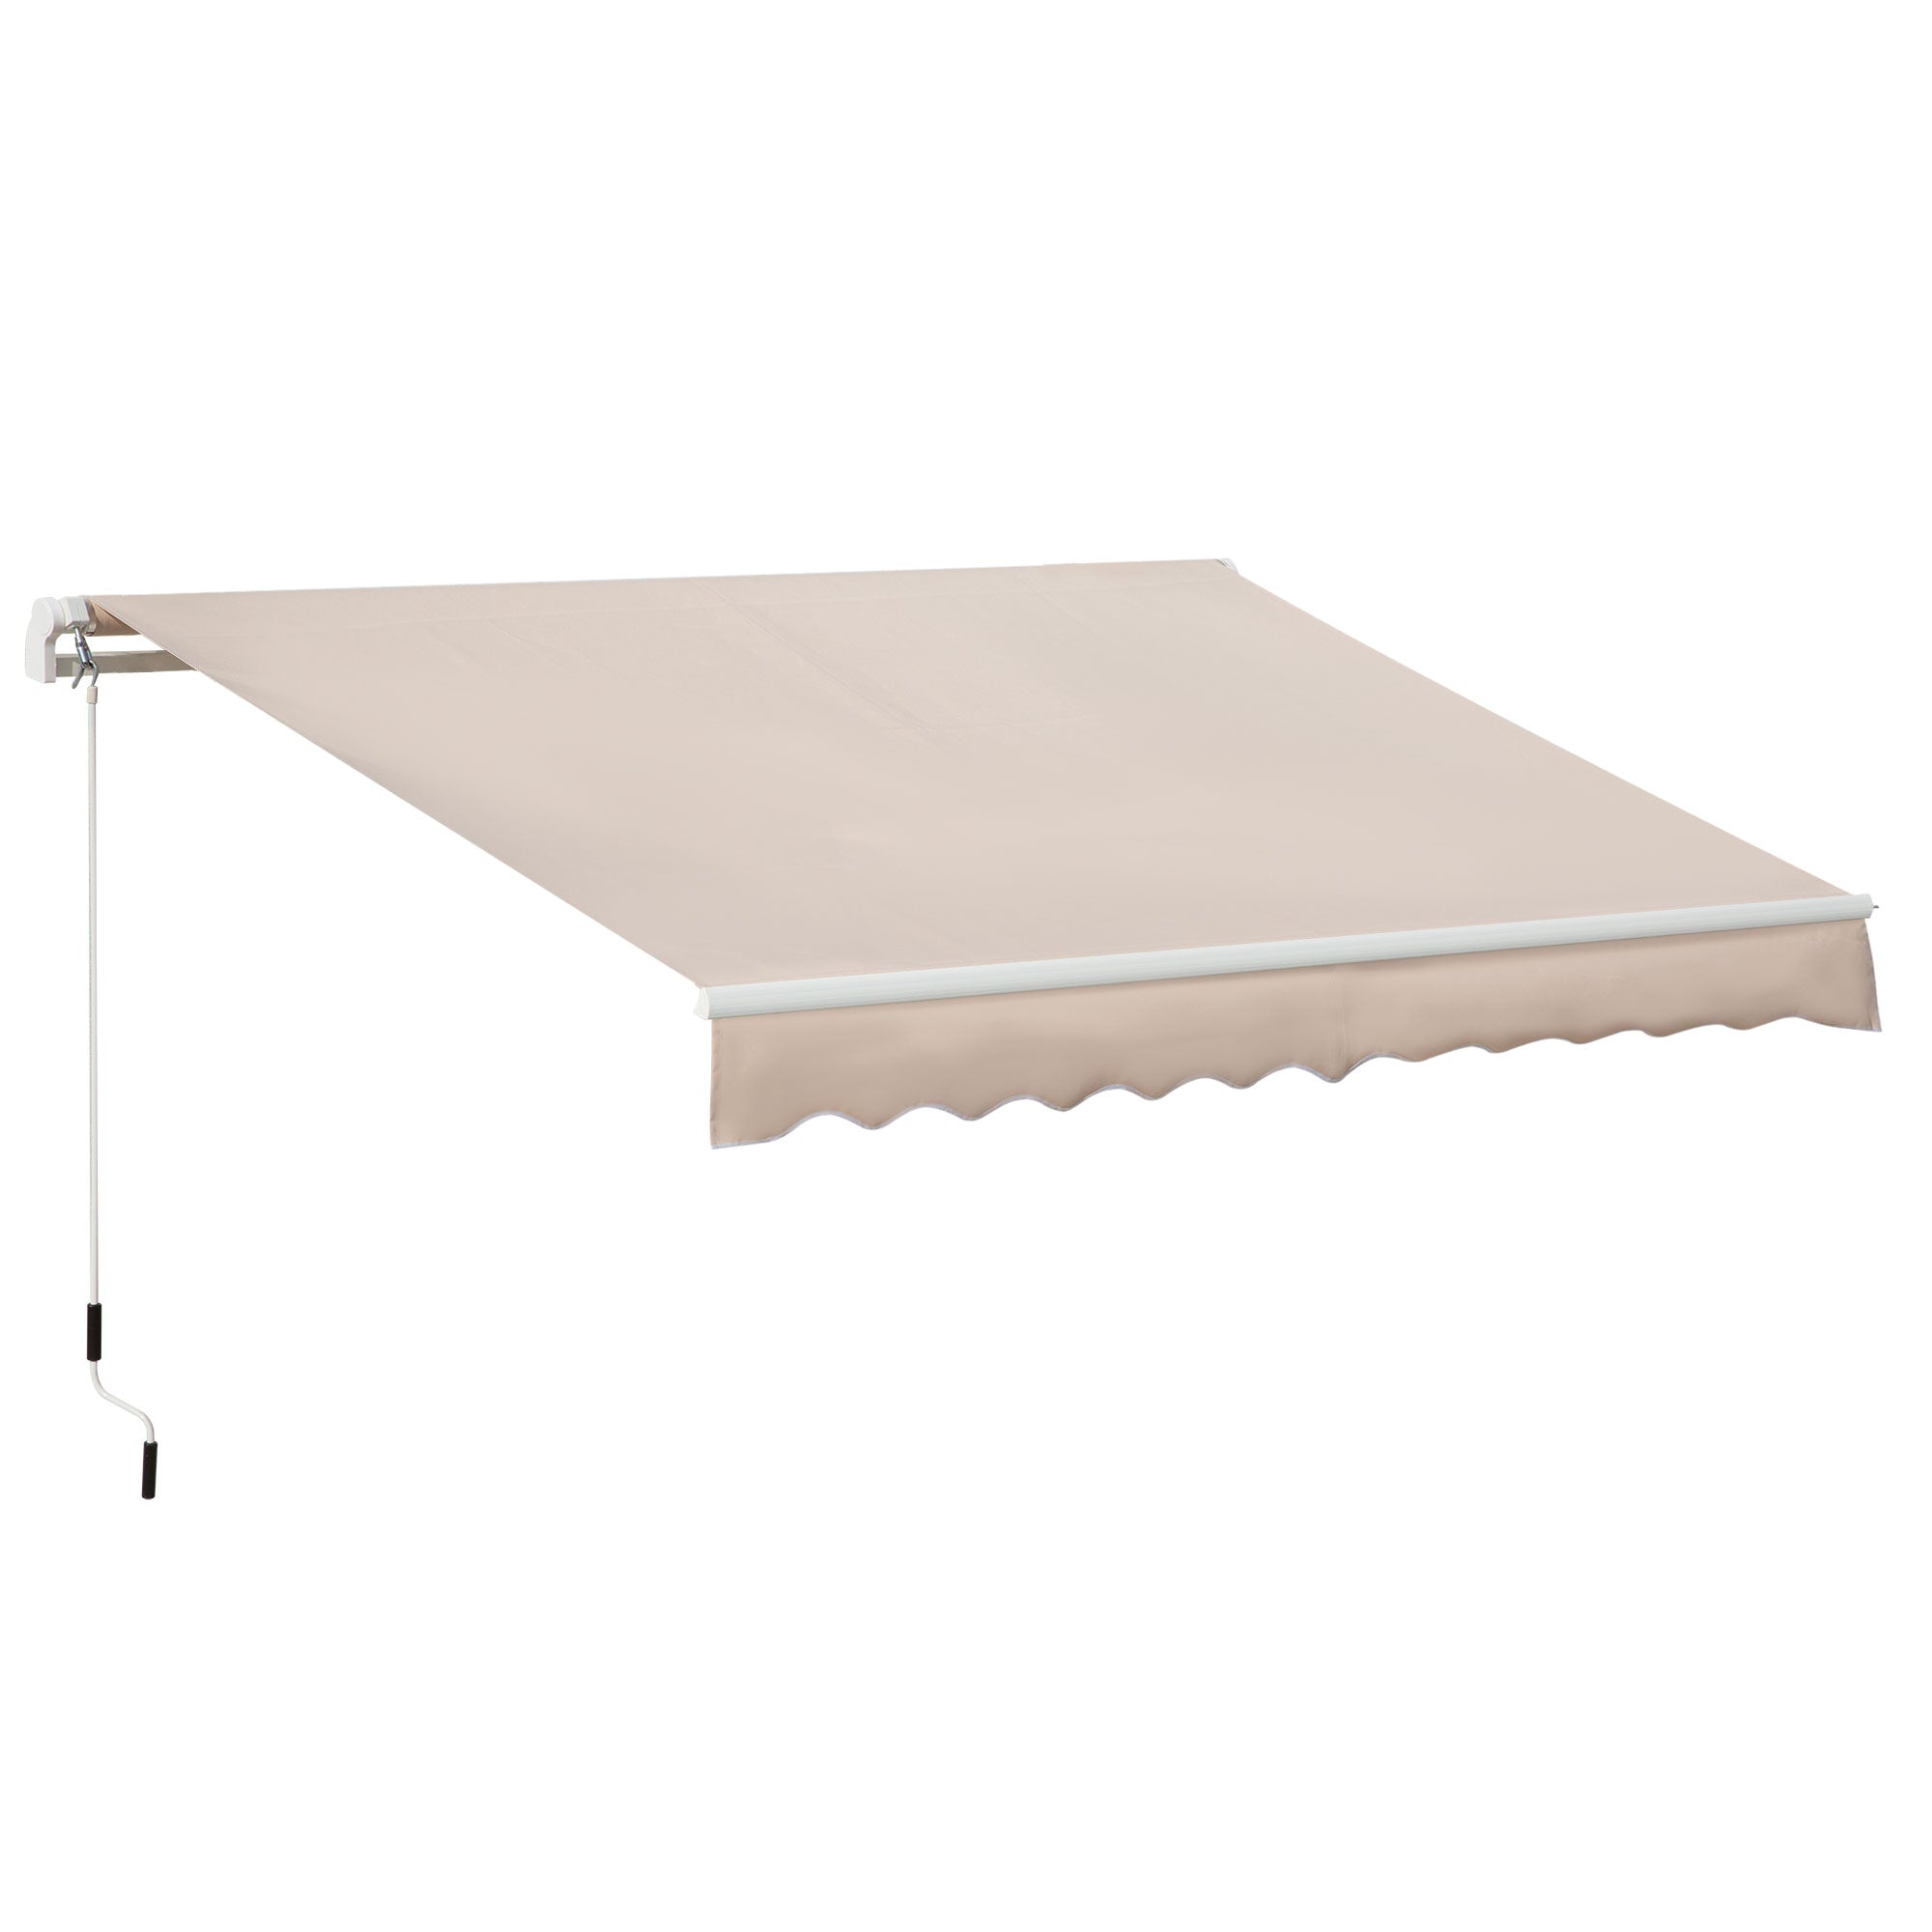 Outsunny Manual Retractable Awning Garden Shelter Canopy 3 x 2m Beige  | TJ Hughes